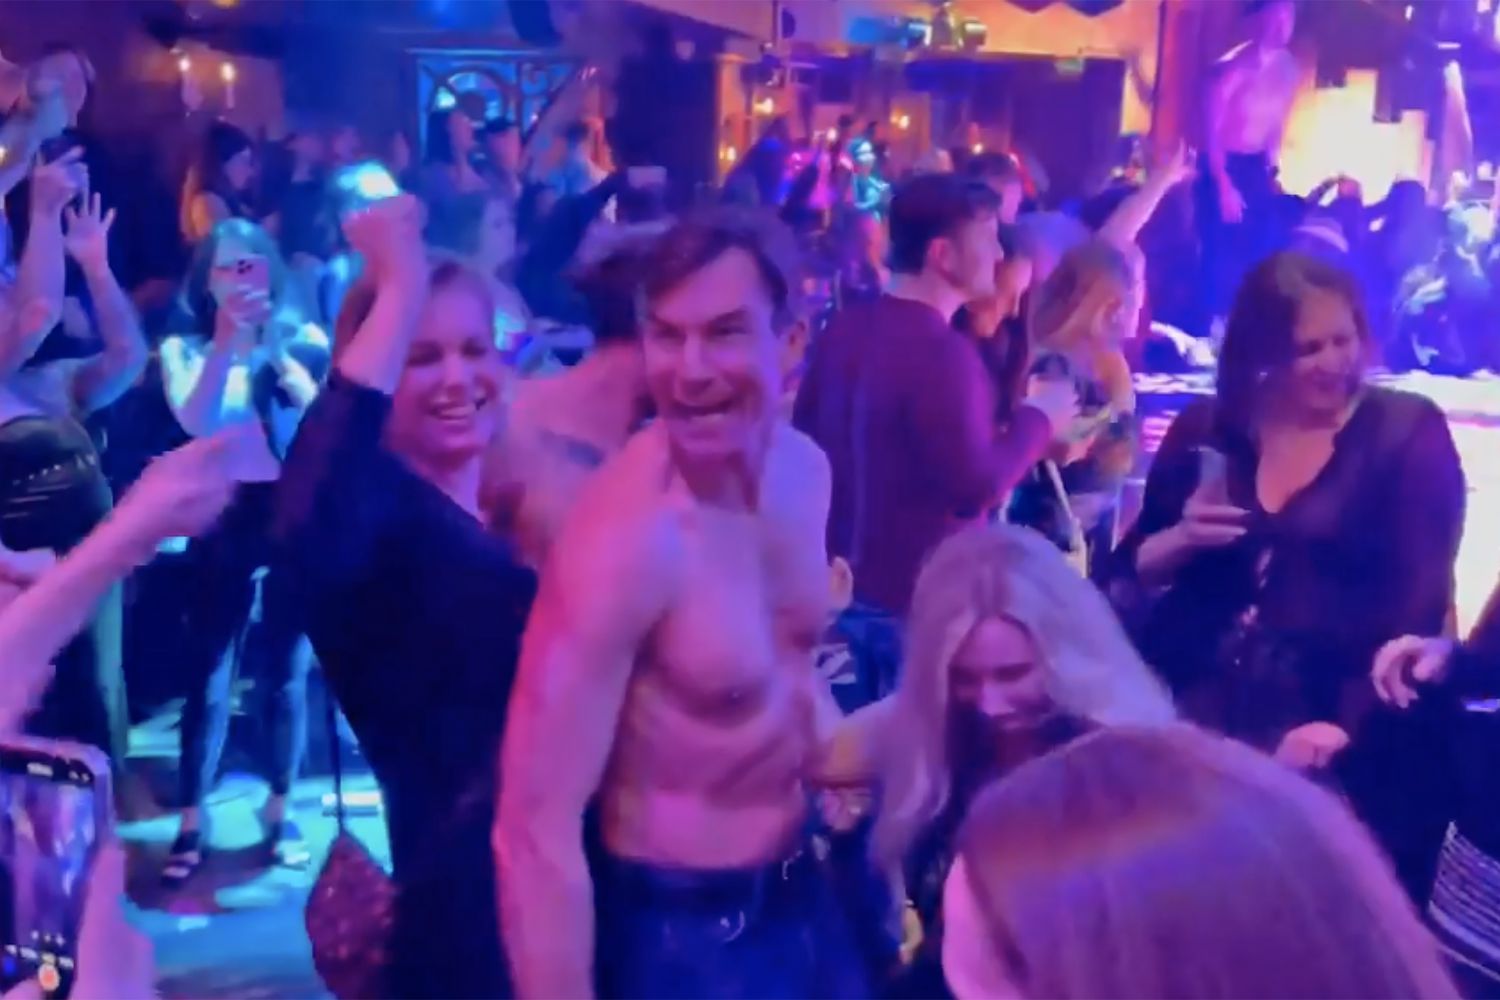 Jerry O’Connell dances with ‘Magic Mike’ for 49th birthday and would do it again ‘in a heartbeat’